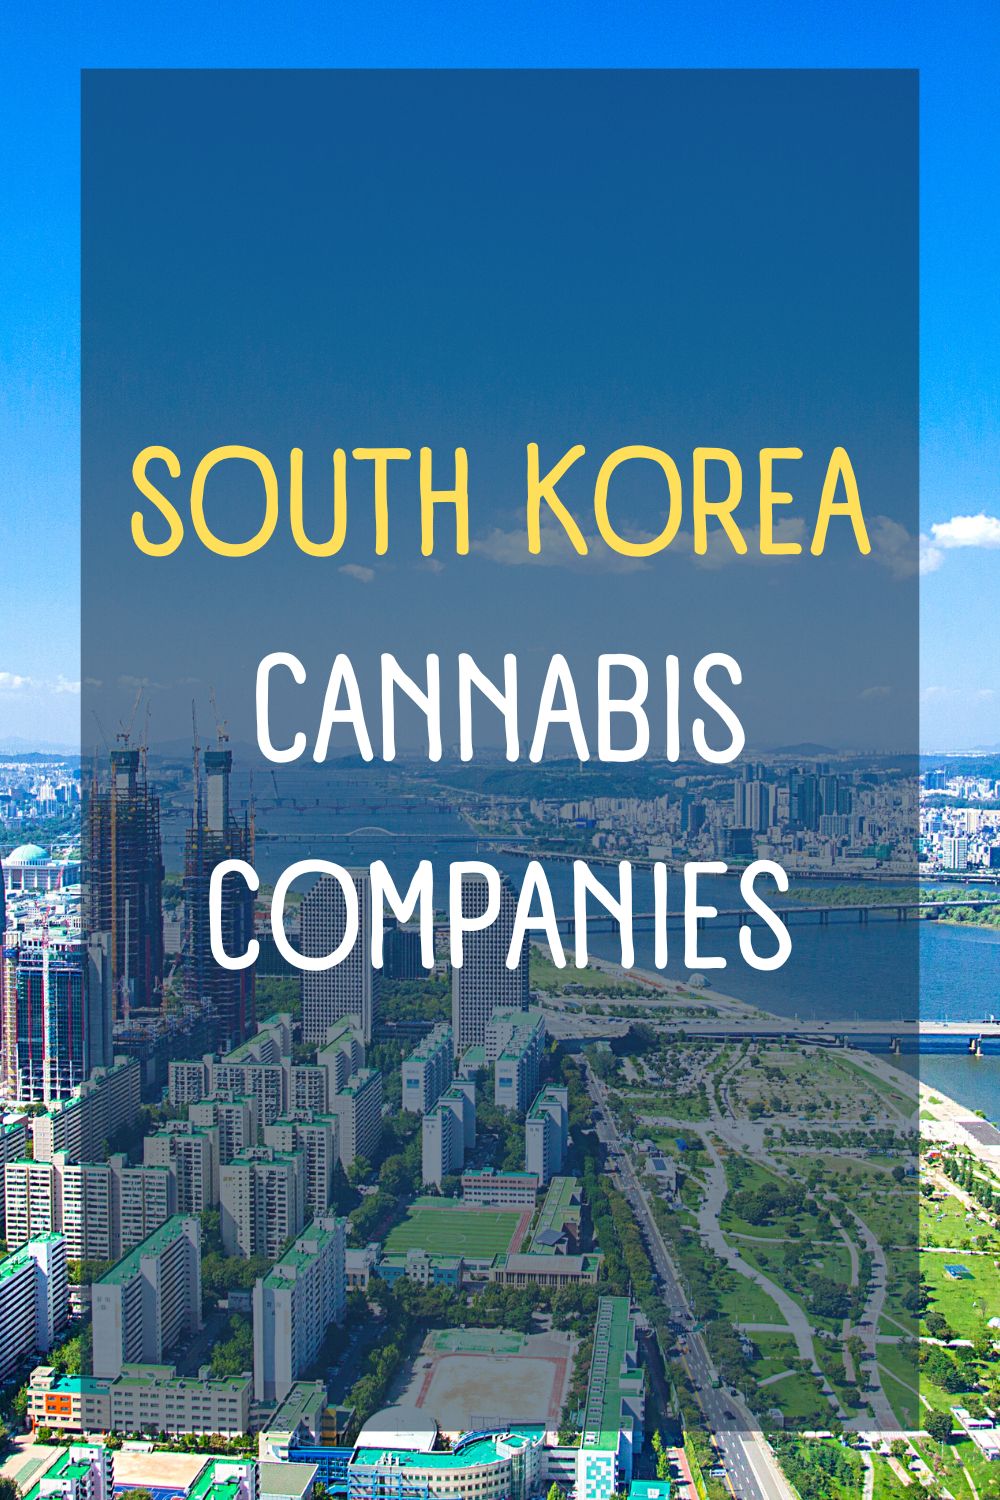 You are currently viewing List of Top Cannabis Companies in South Korea